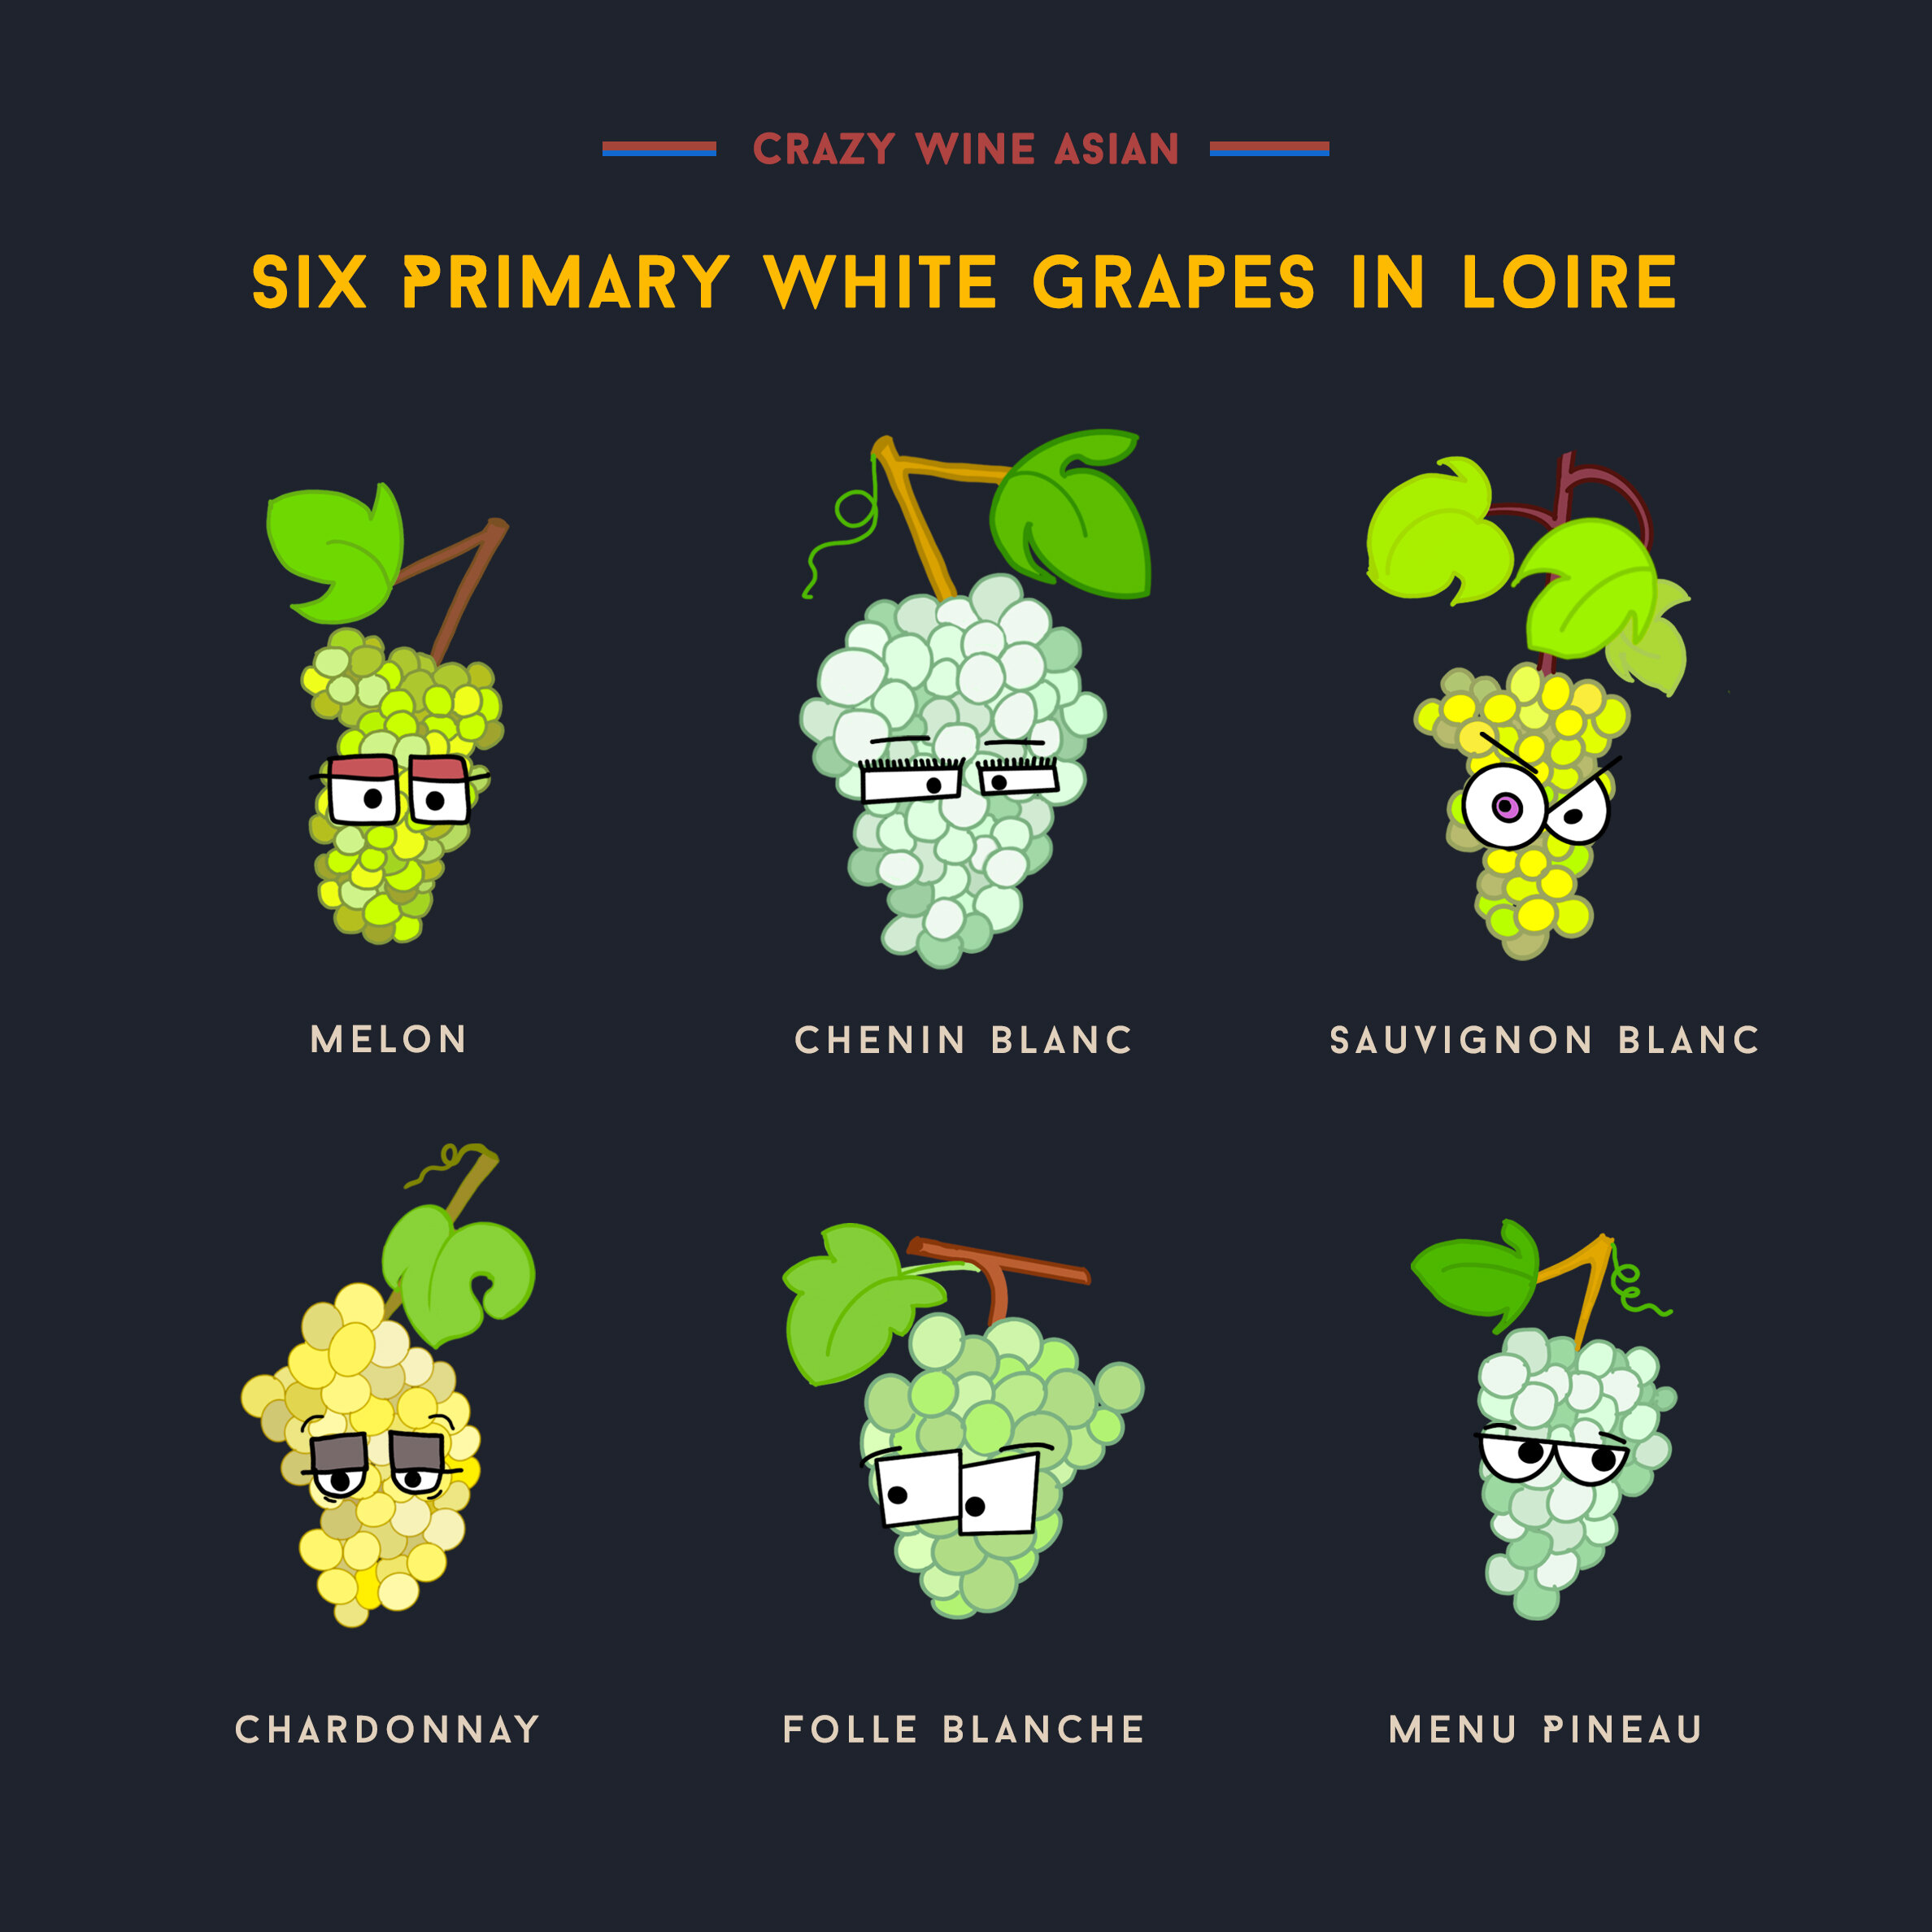 six-primary-white-grapes-in-loire-IG.jpg